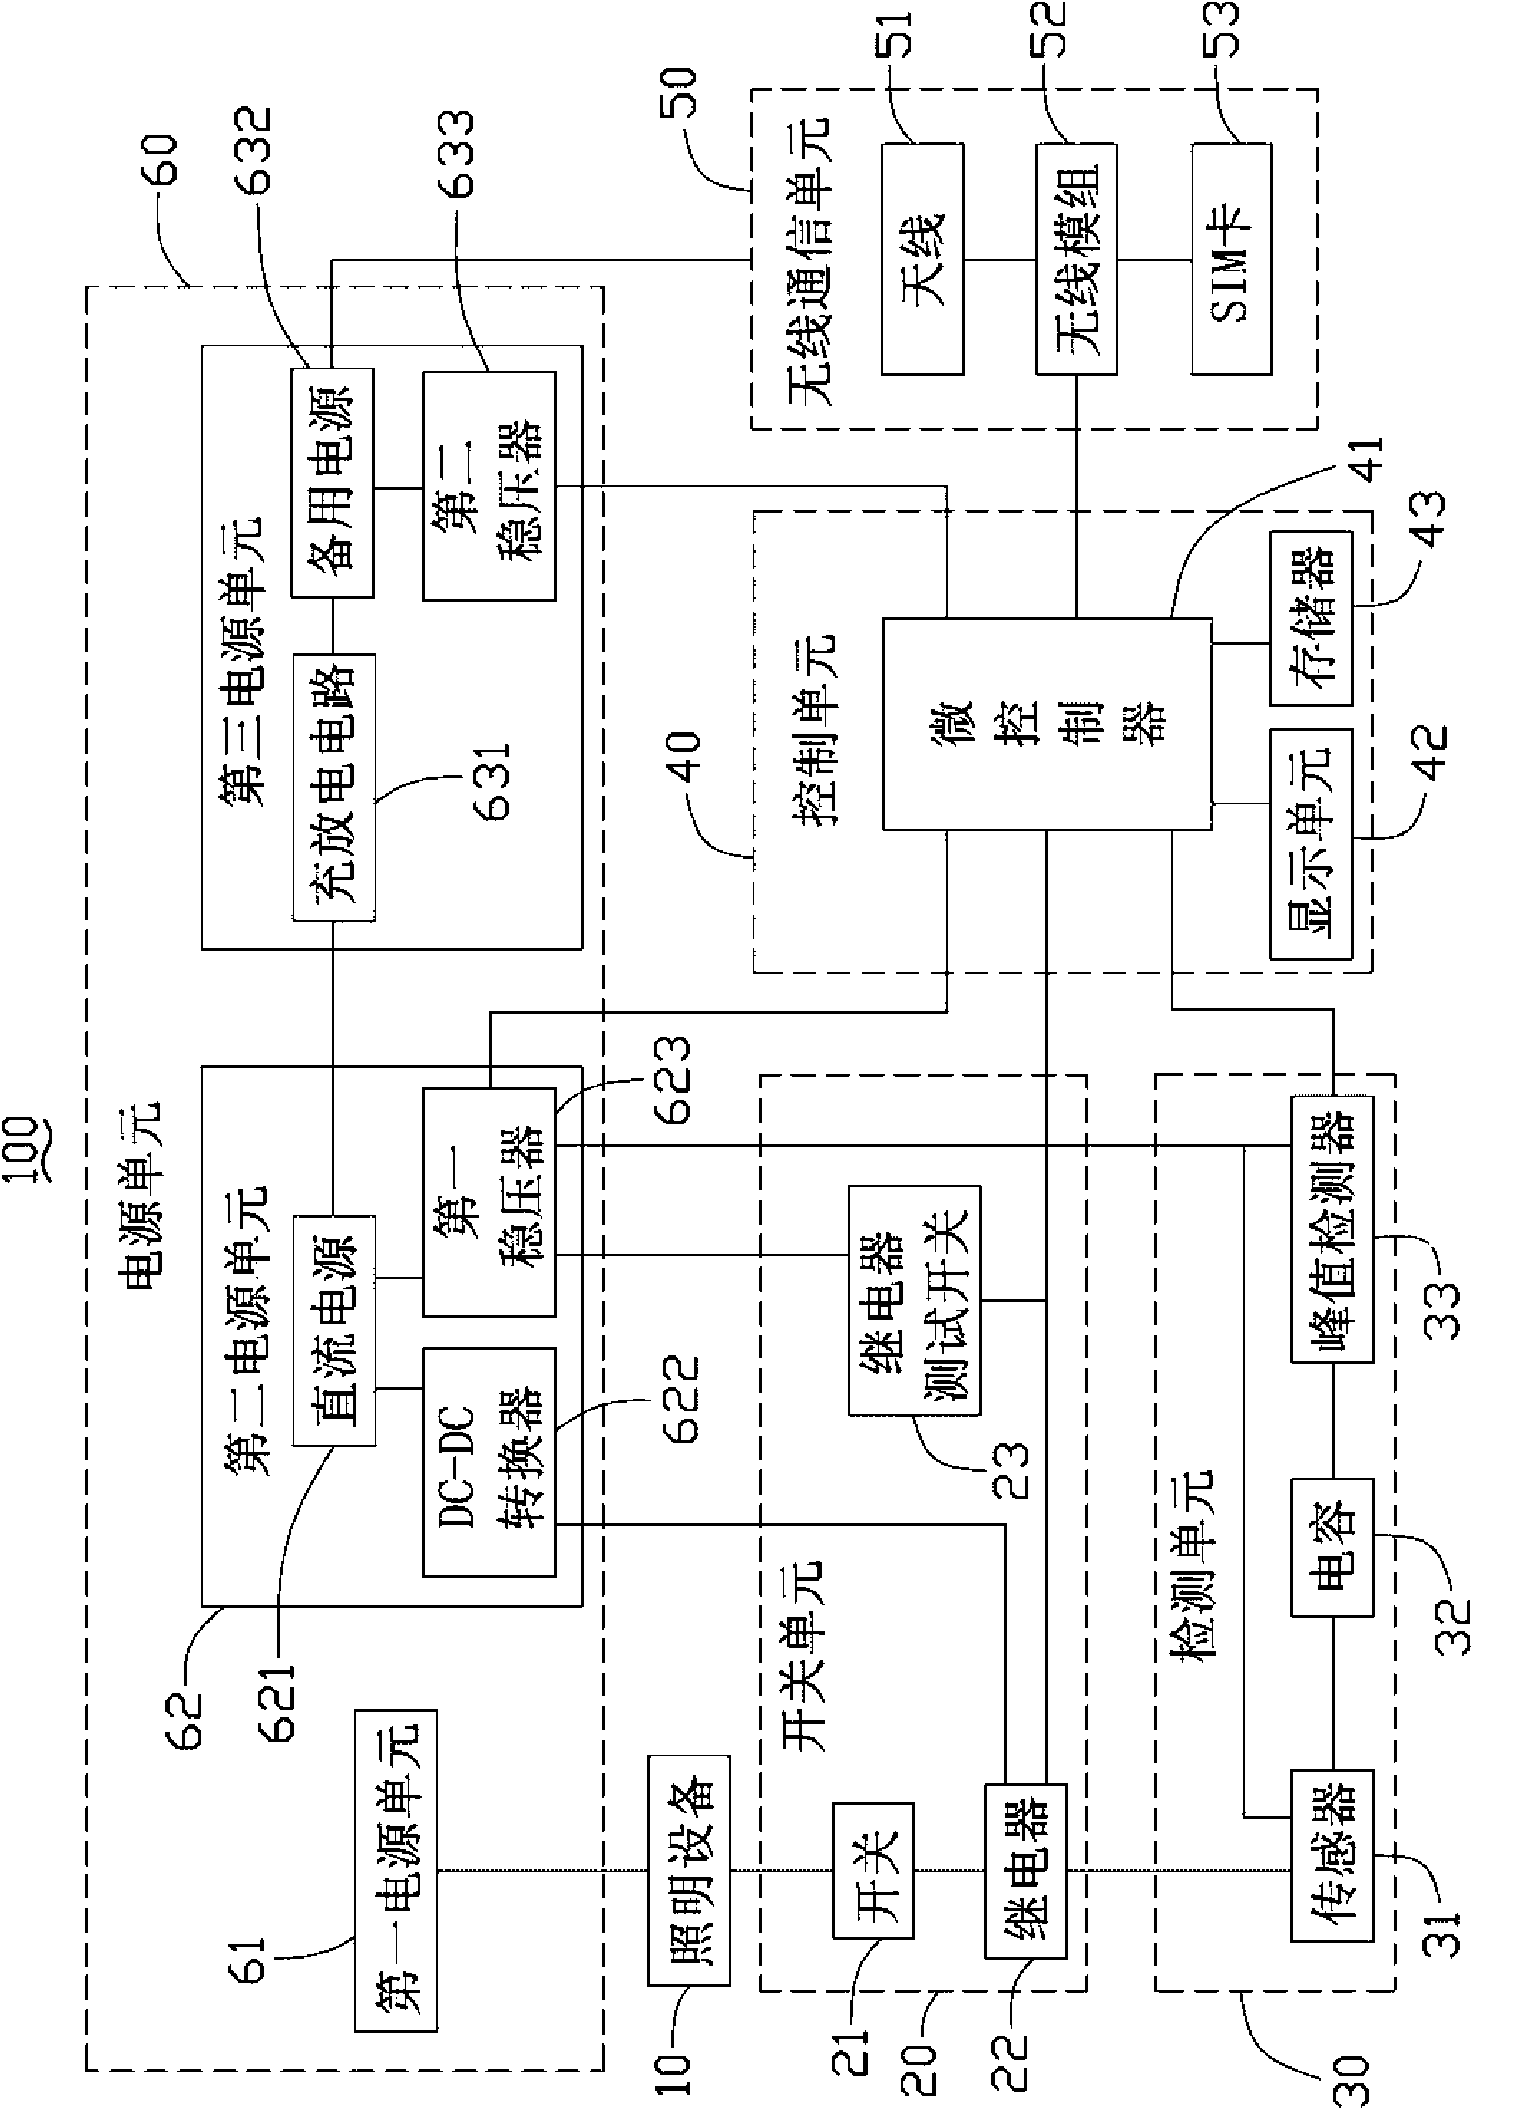 Illumination device with wireless control function